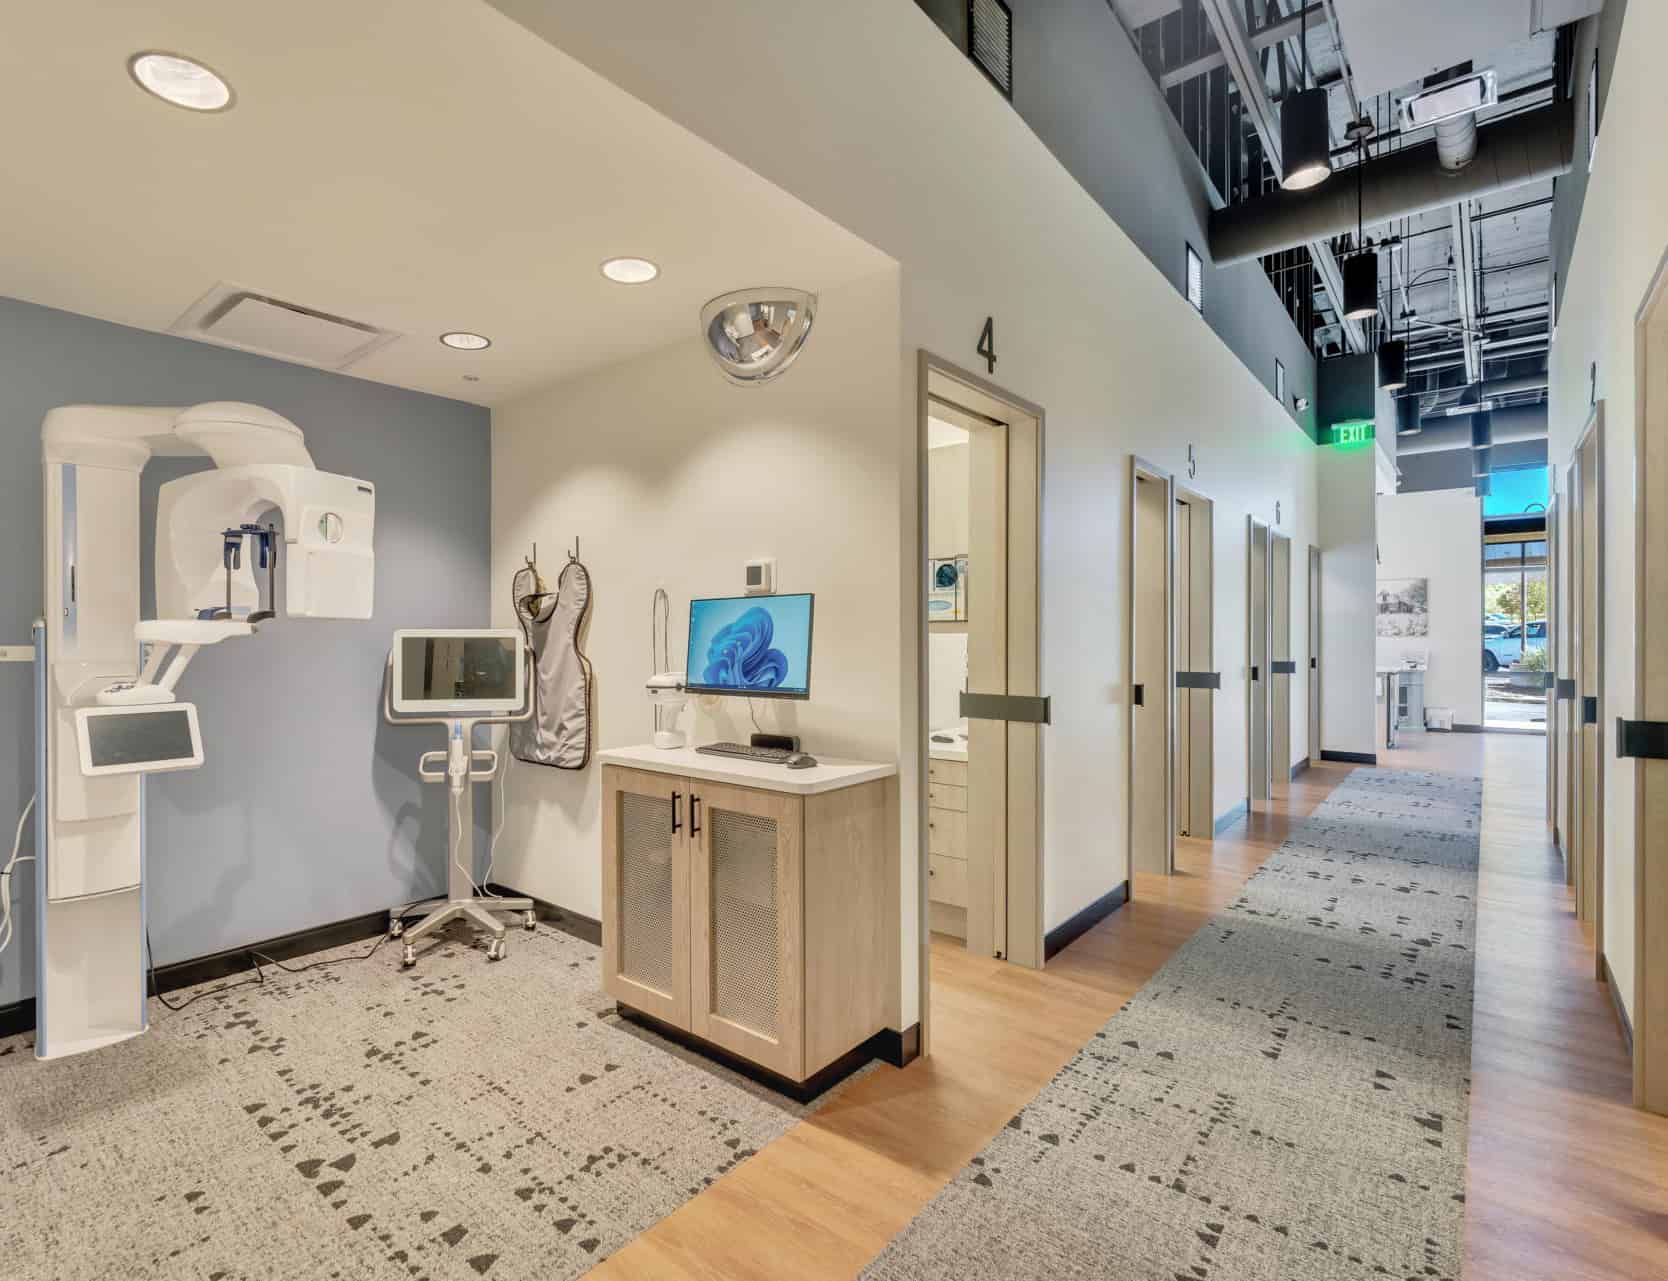 Our 3D x-ray scanner and several of our treatment rooms inside the Signature Dentistry Centennial office